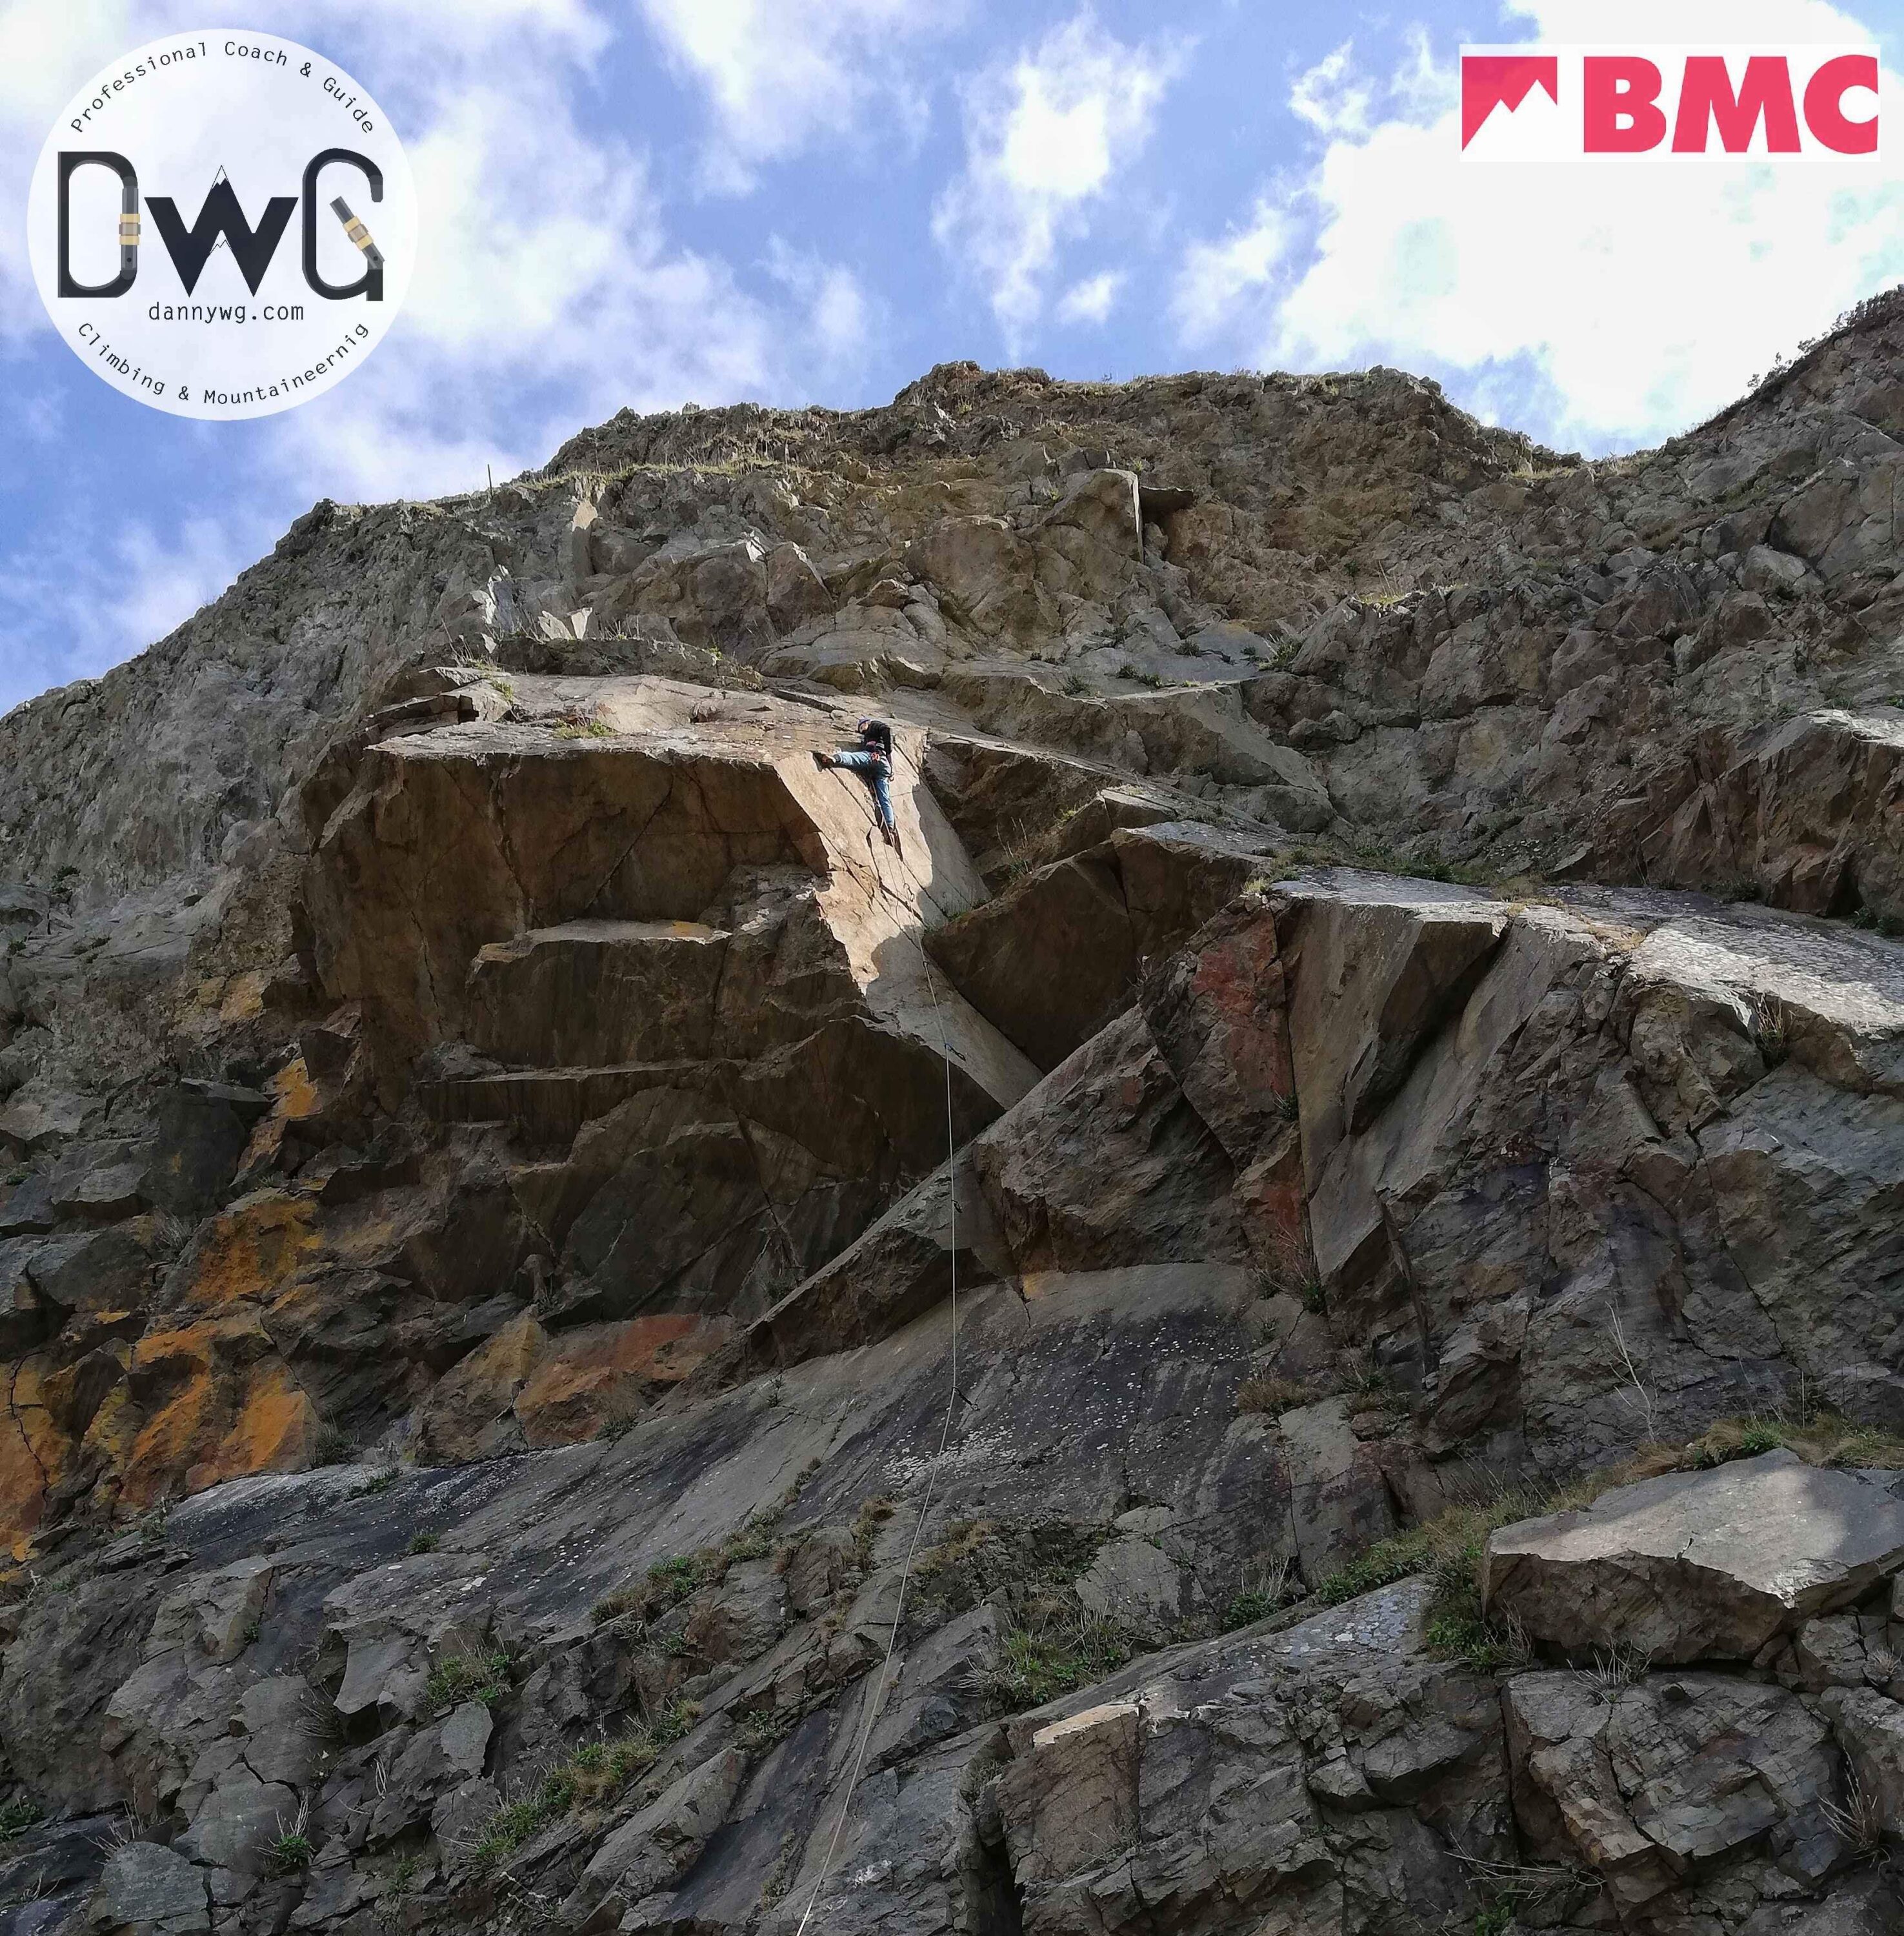 BMC sport climbing courses for young people